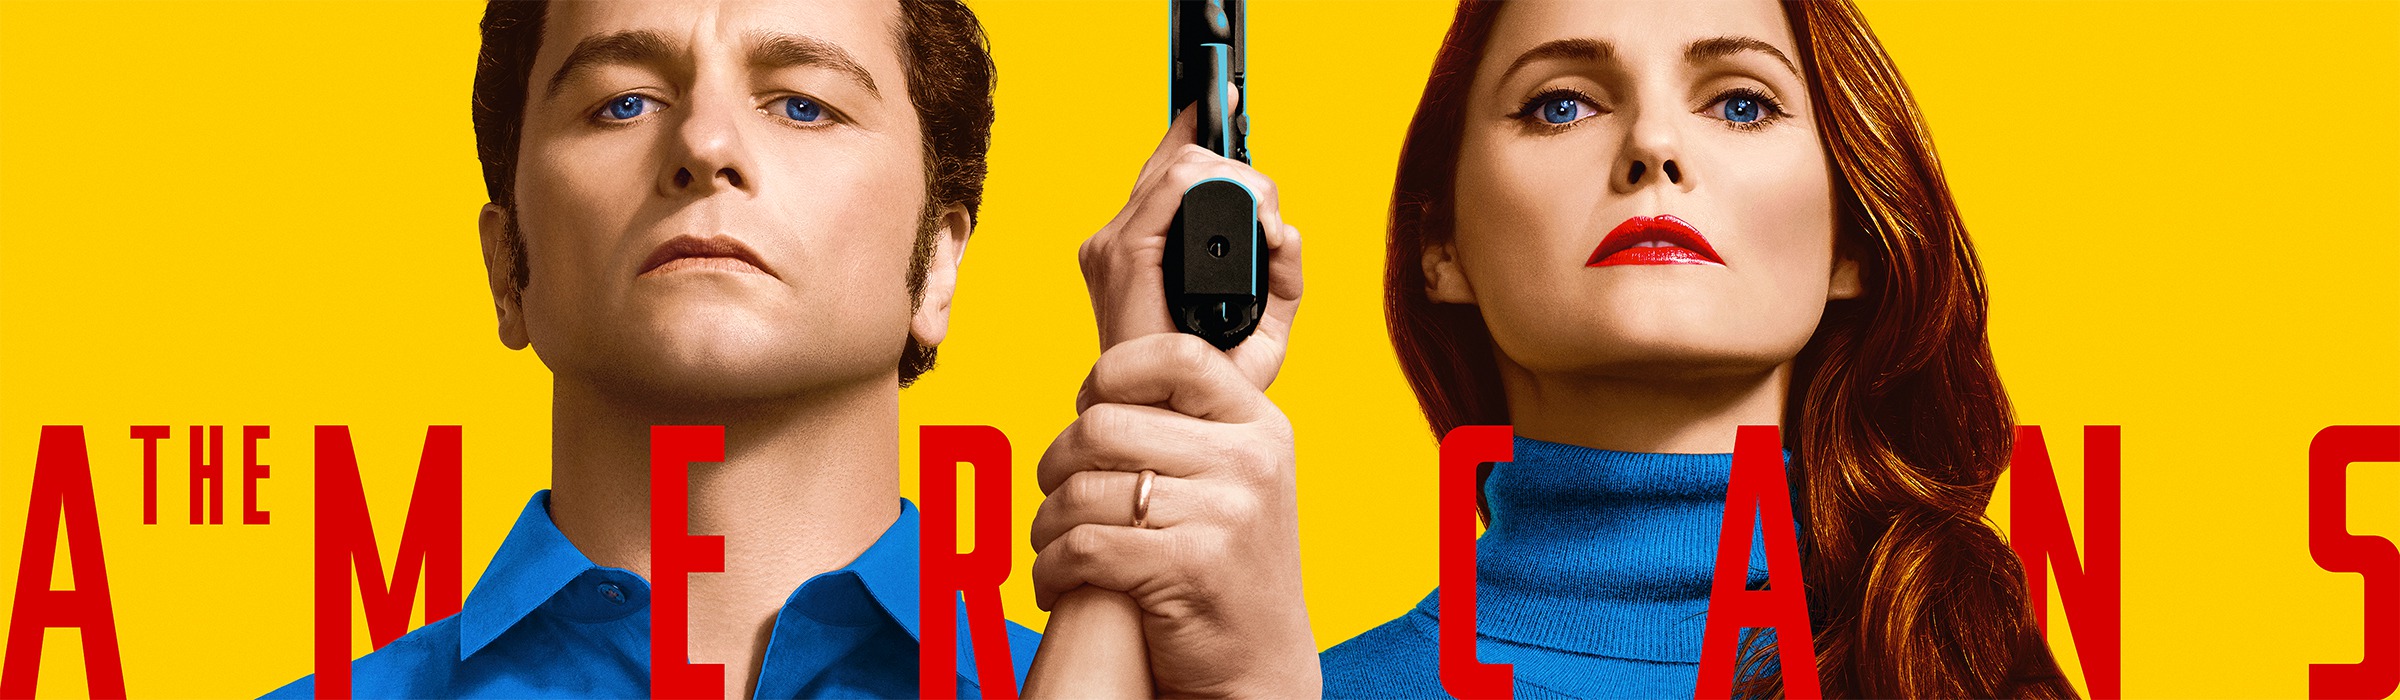 Mega Sized Movie Poster Image for The Americans (#15 of 16)